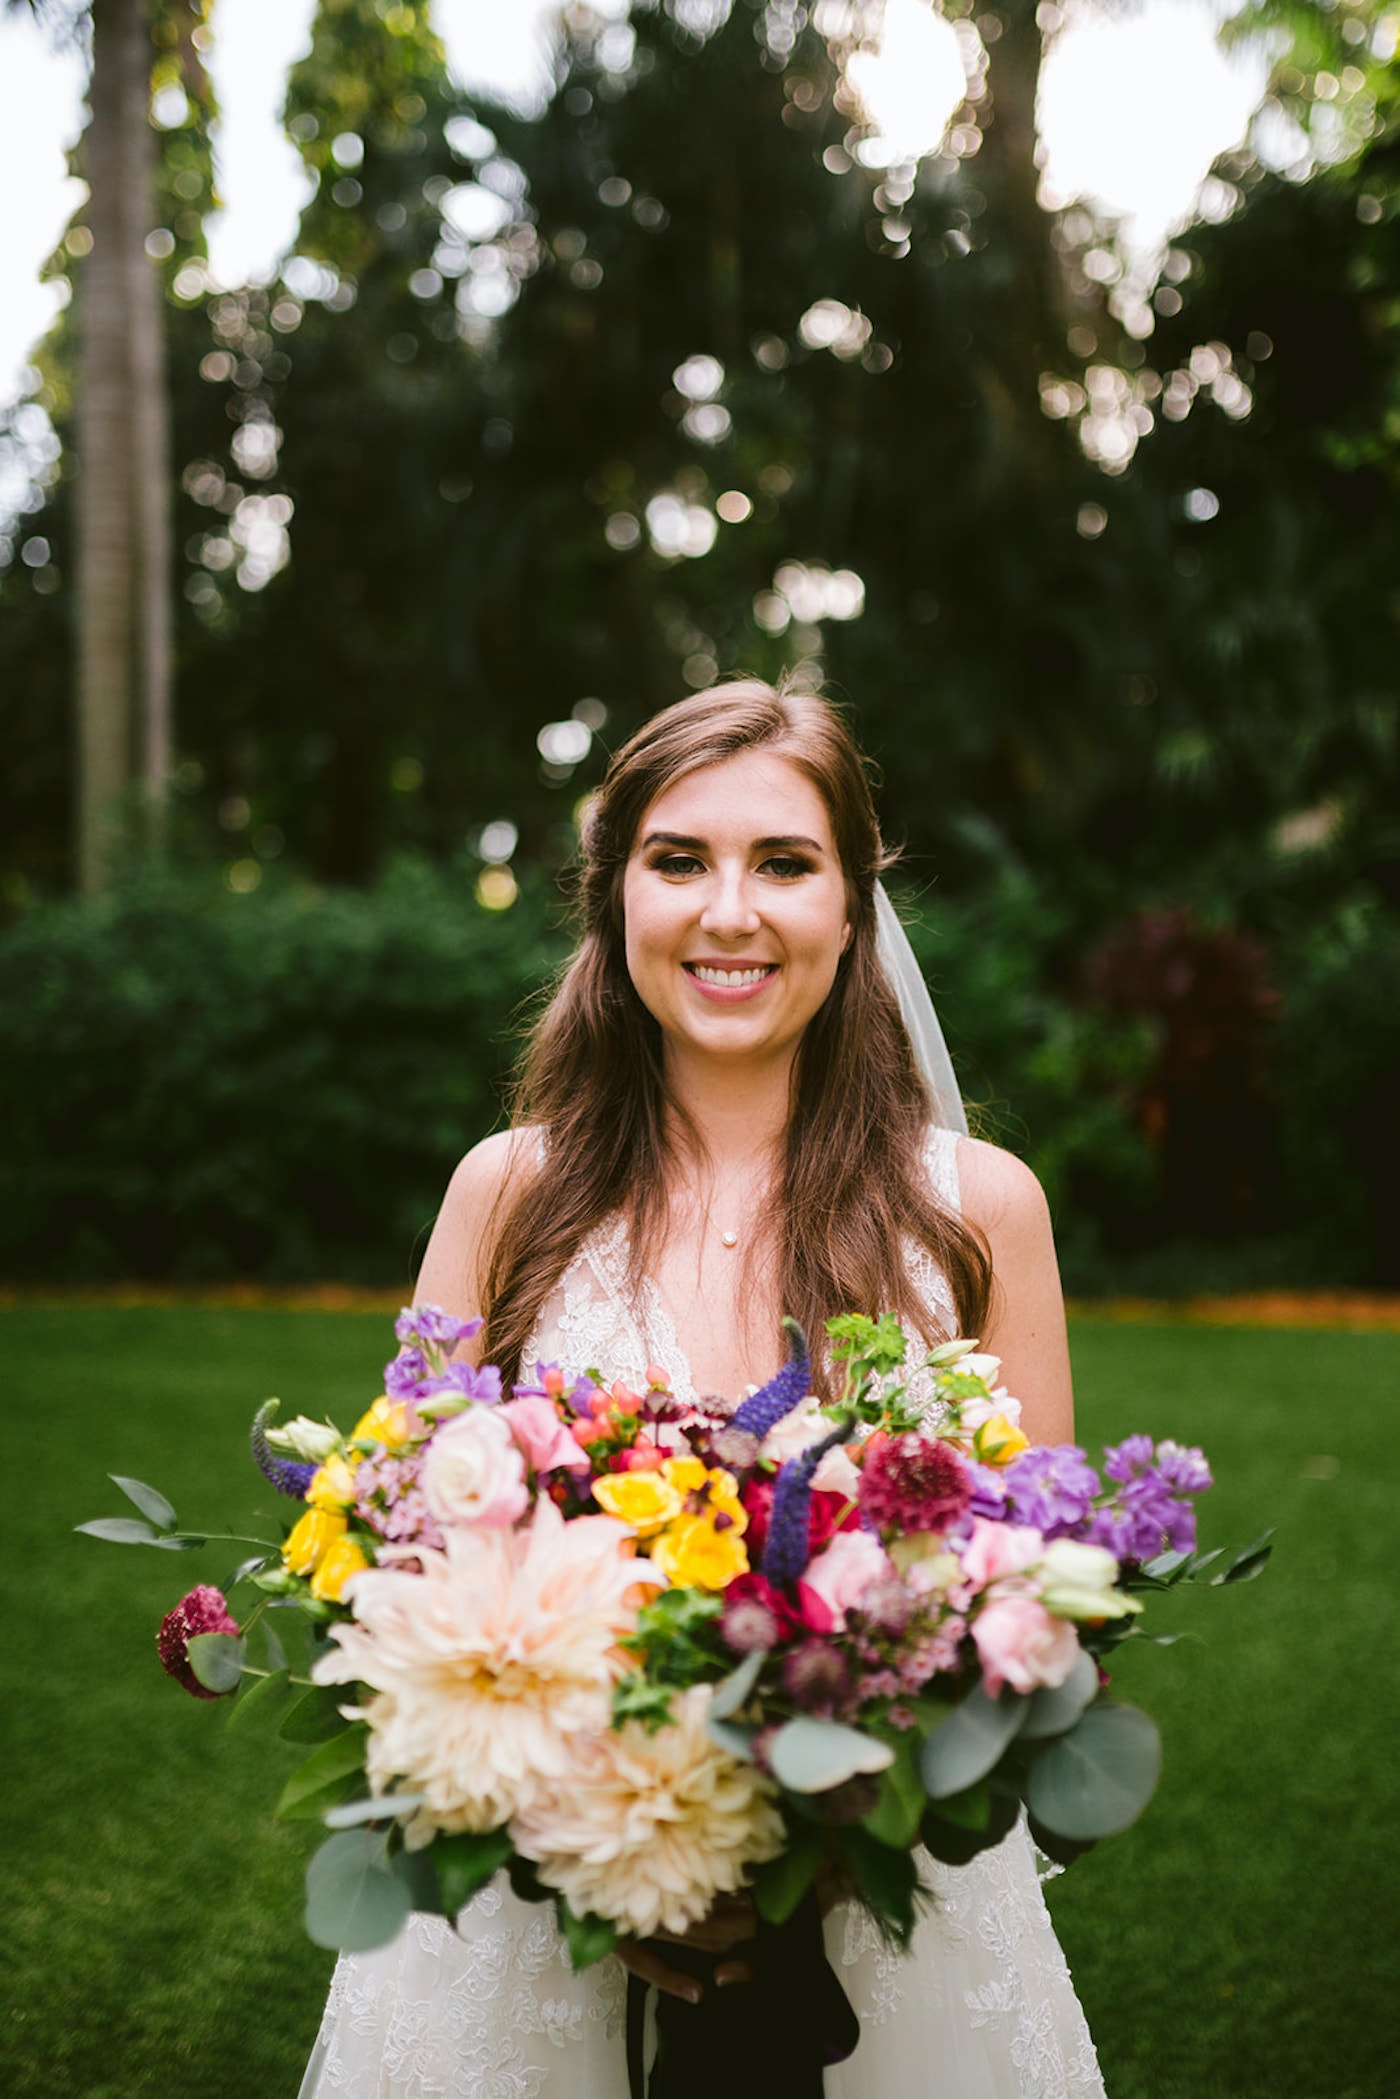 Whimsical Boho Bride Holding Colorful Wild Flower Wedding Bouquet, Pink and Yellow Roses, Blush Dahlia, Purple, Red and White Florals with Greenery Eucalyptus